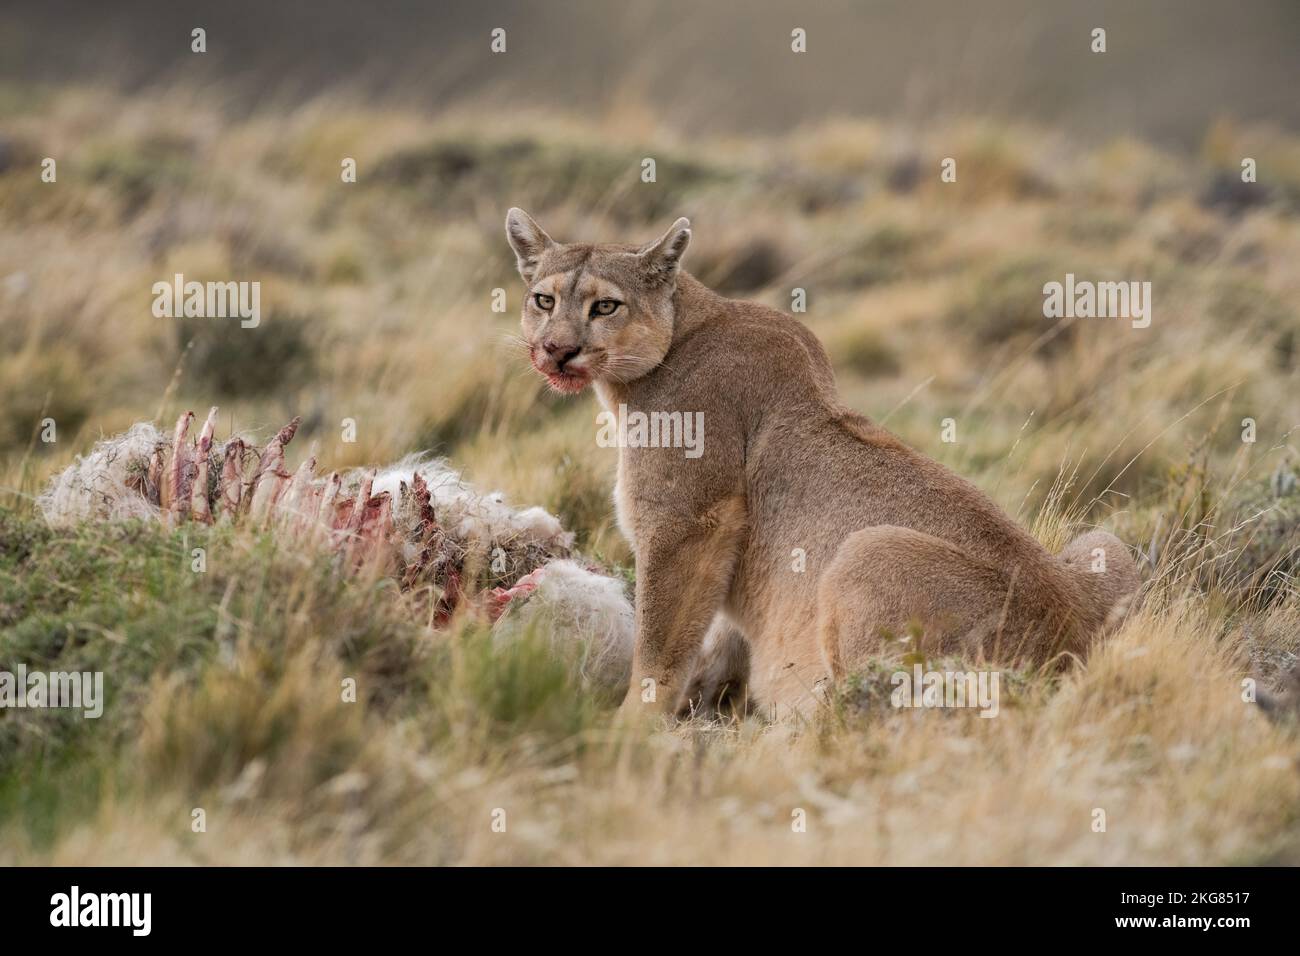 A Puma eating a guanaco carcass near Torres del Paine, Chile Stock Photo